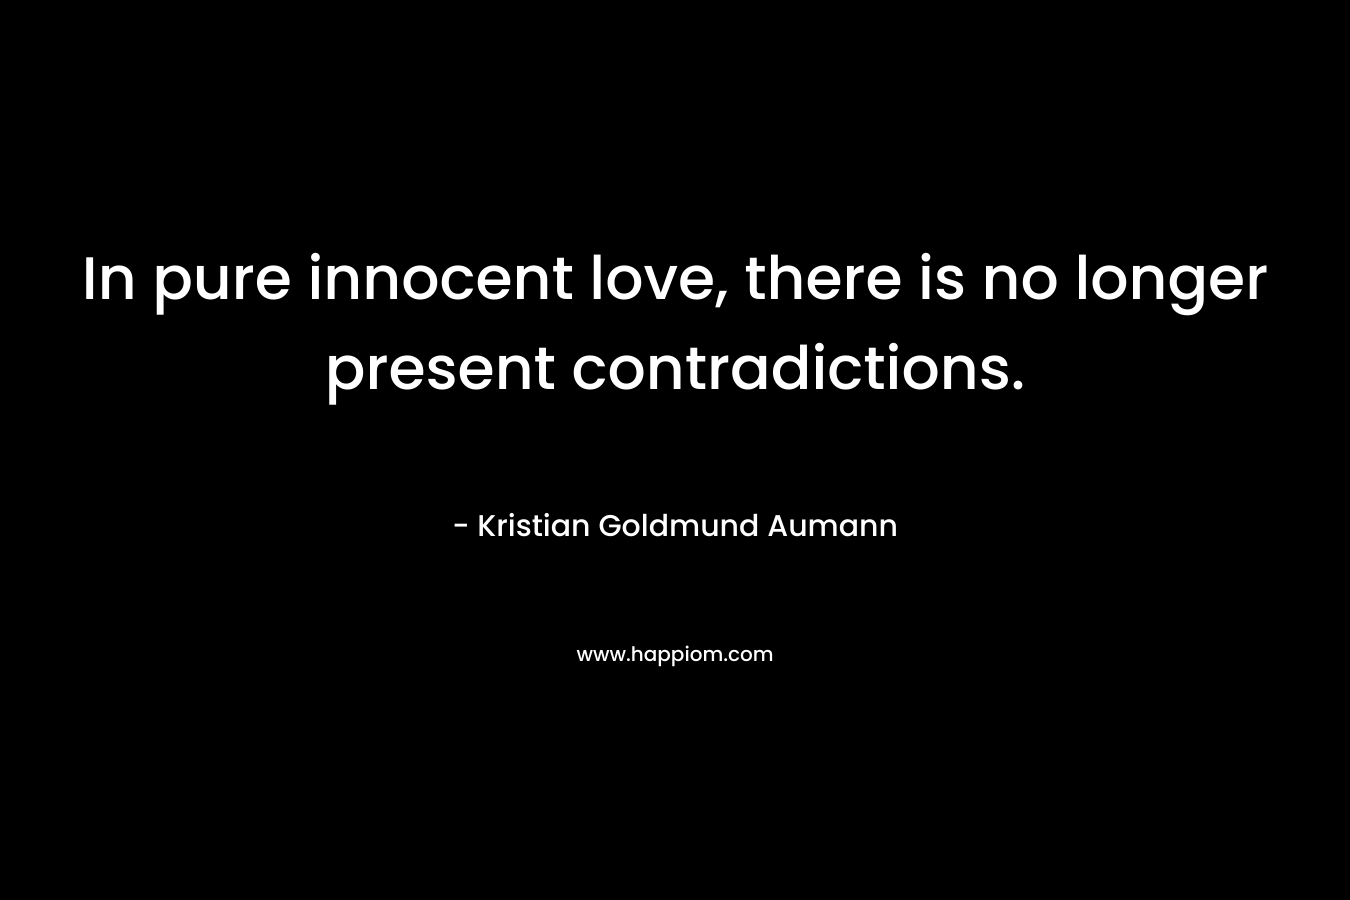 In pure innocent love, there is no longer present contradictions. – Kristian Goldmund Aumann